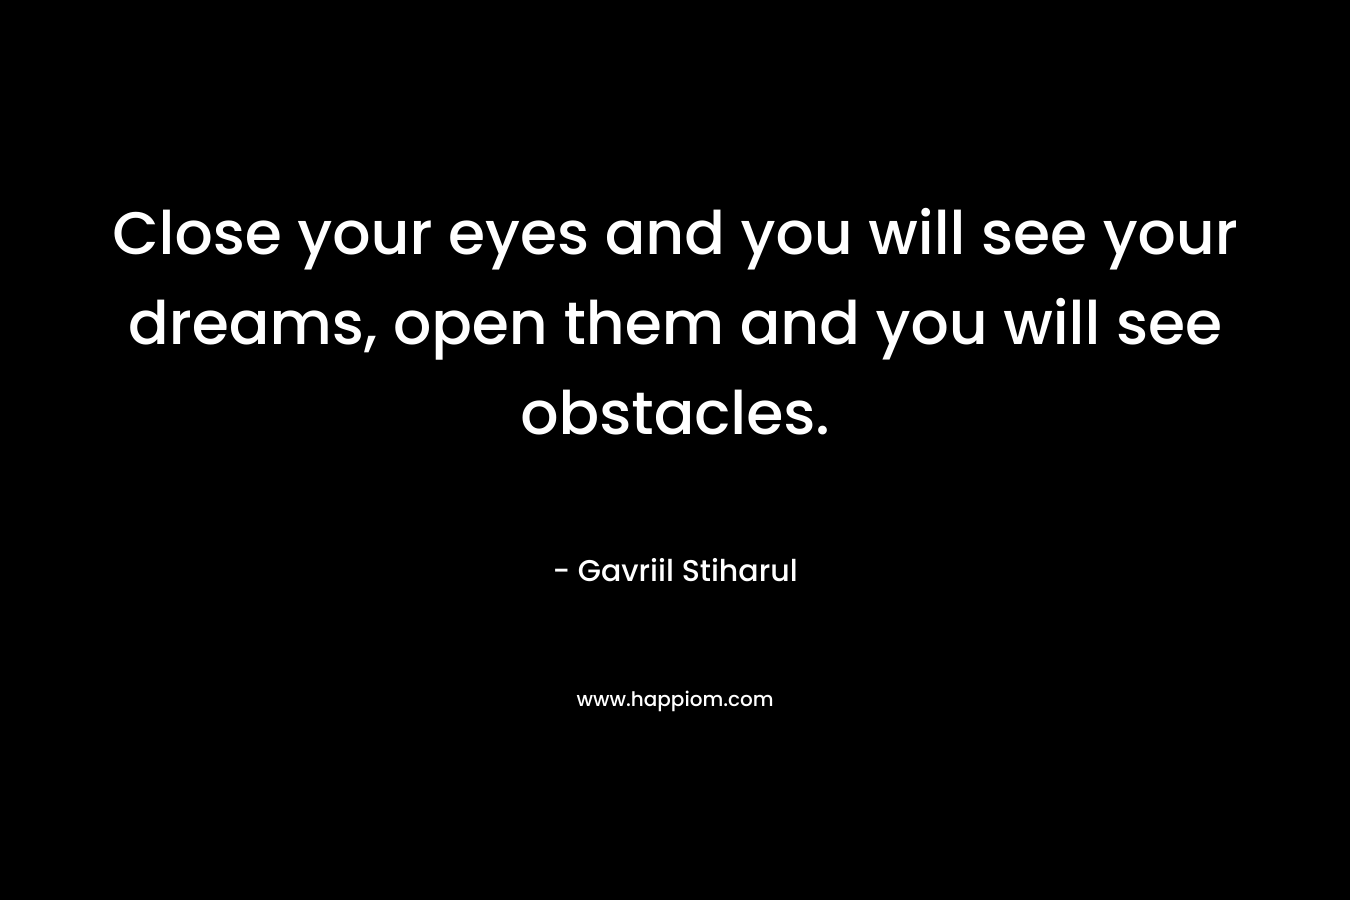 Close your eyes and you will see your dreams, open them and you will see obstacles.